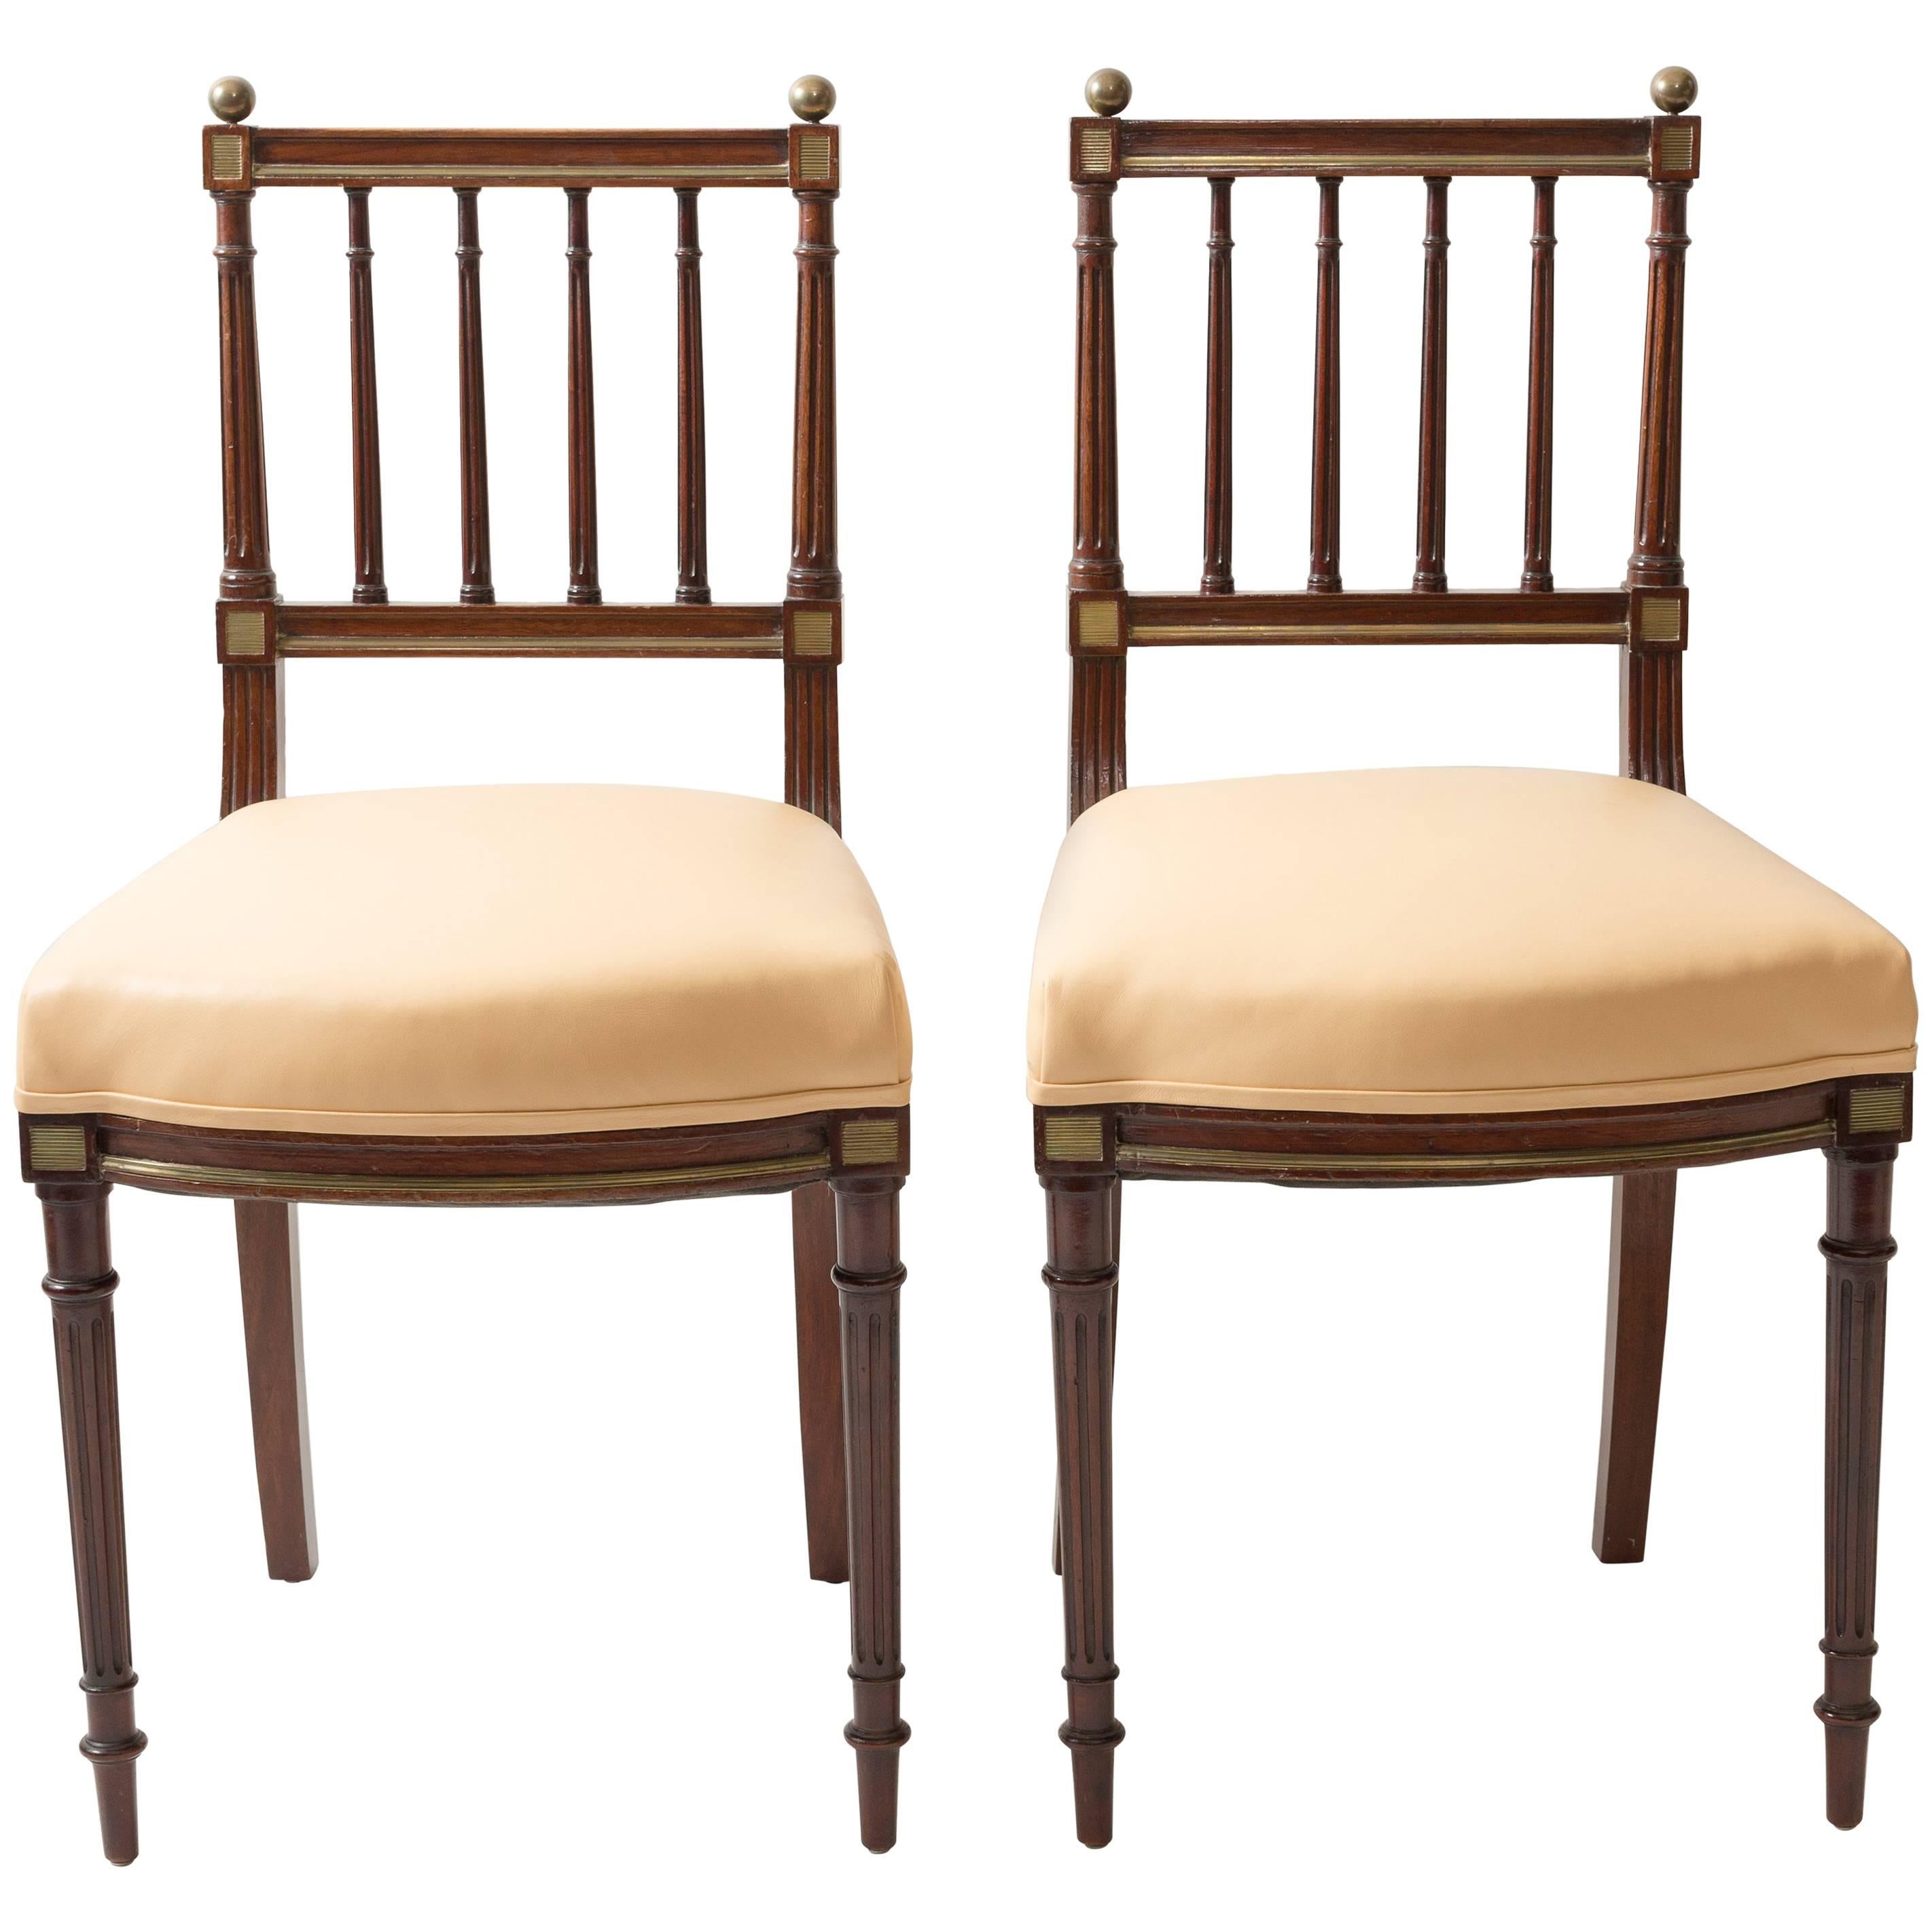 Pair of Gold Trimmed Neoclassical Opera Chairs